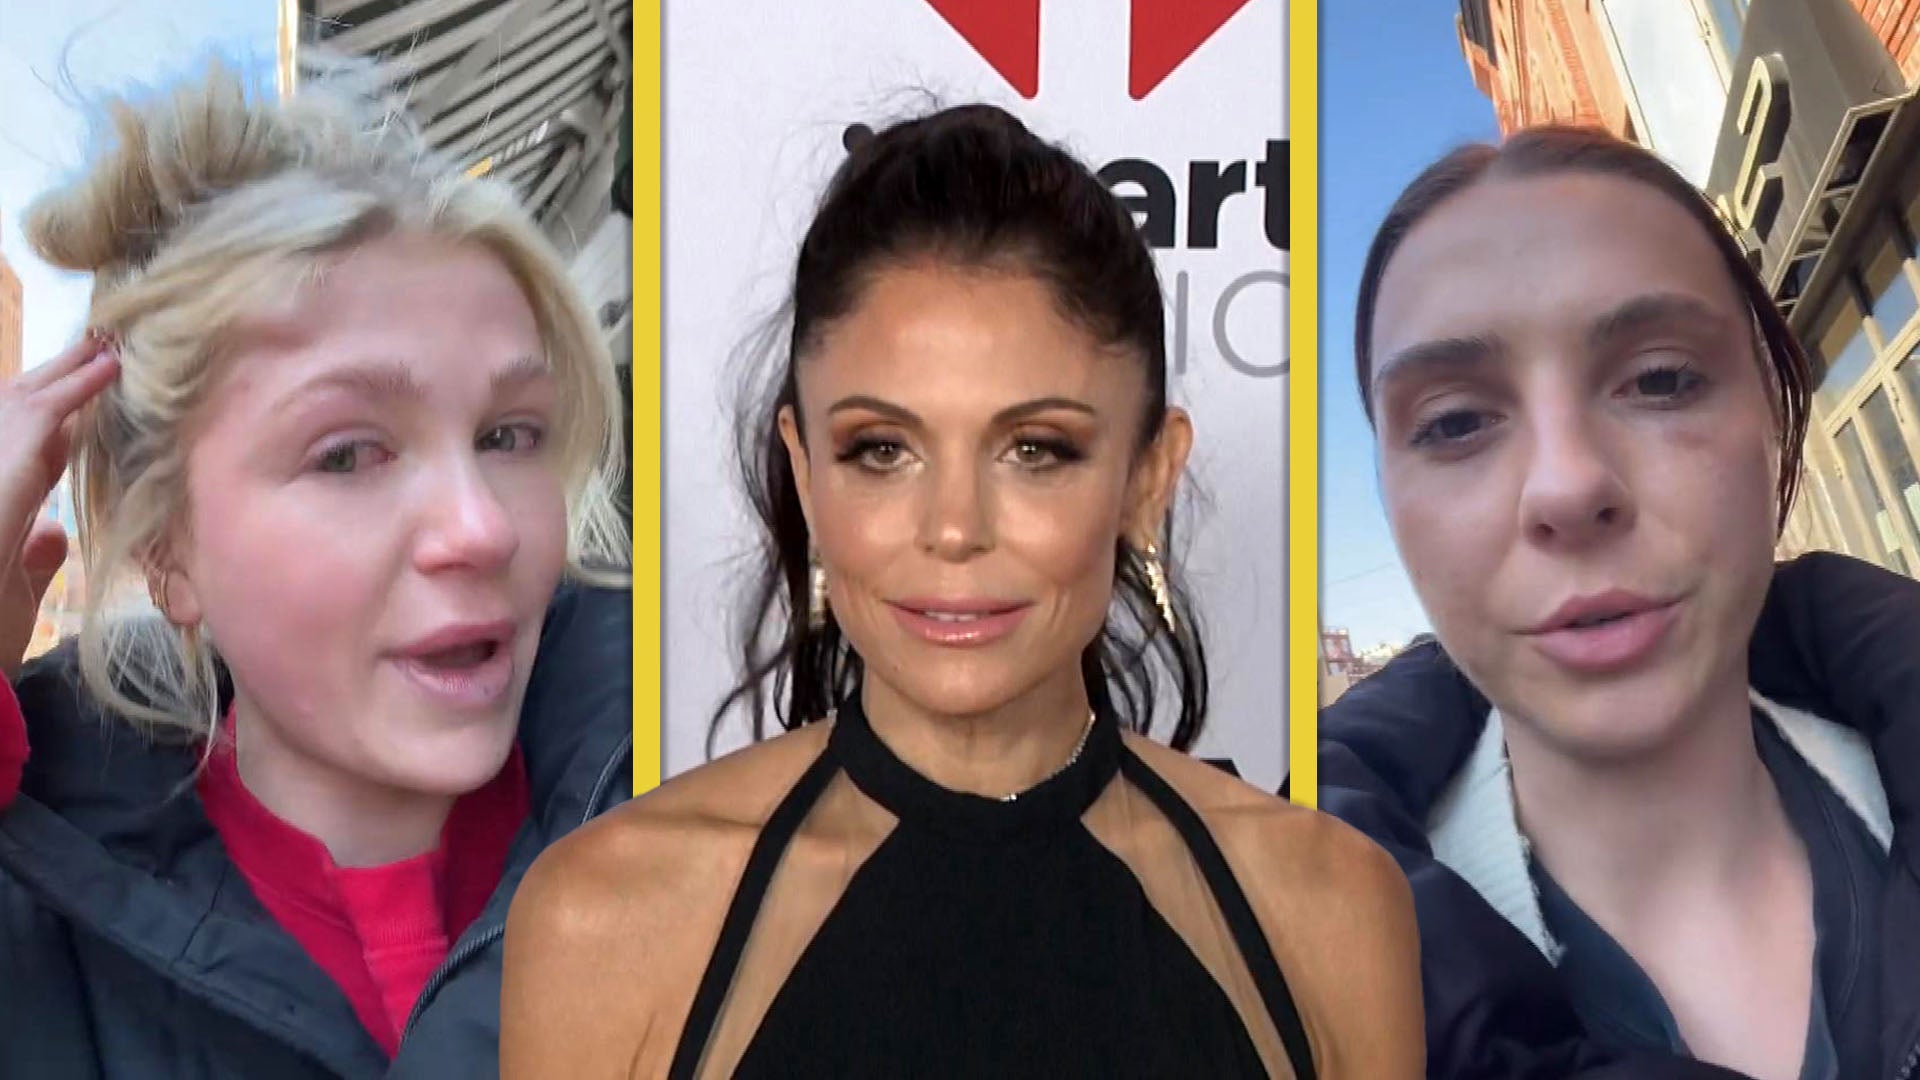 Bethenny Frankel Claims to Be Among Dozens of Women Randomly Being Punched in NYC